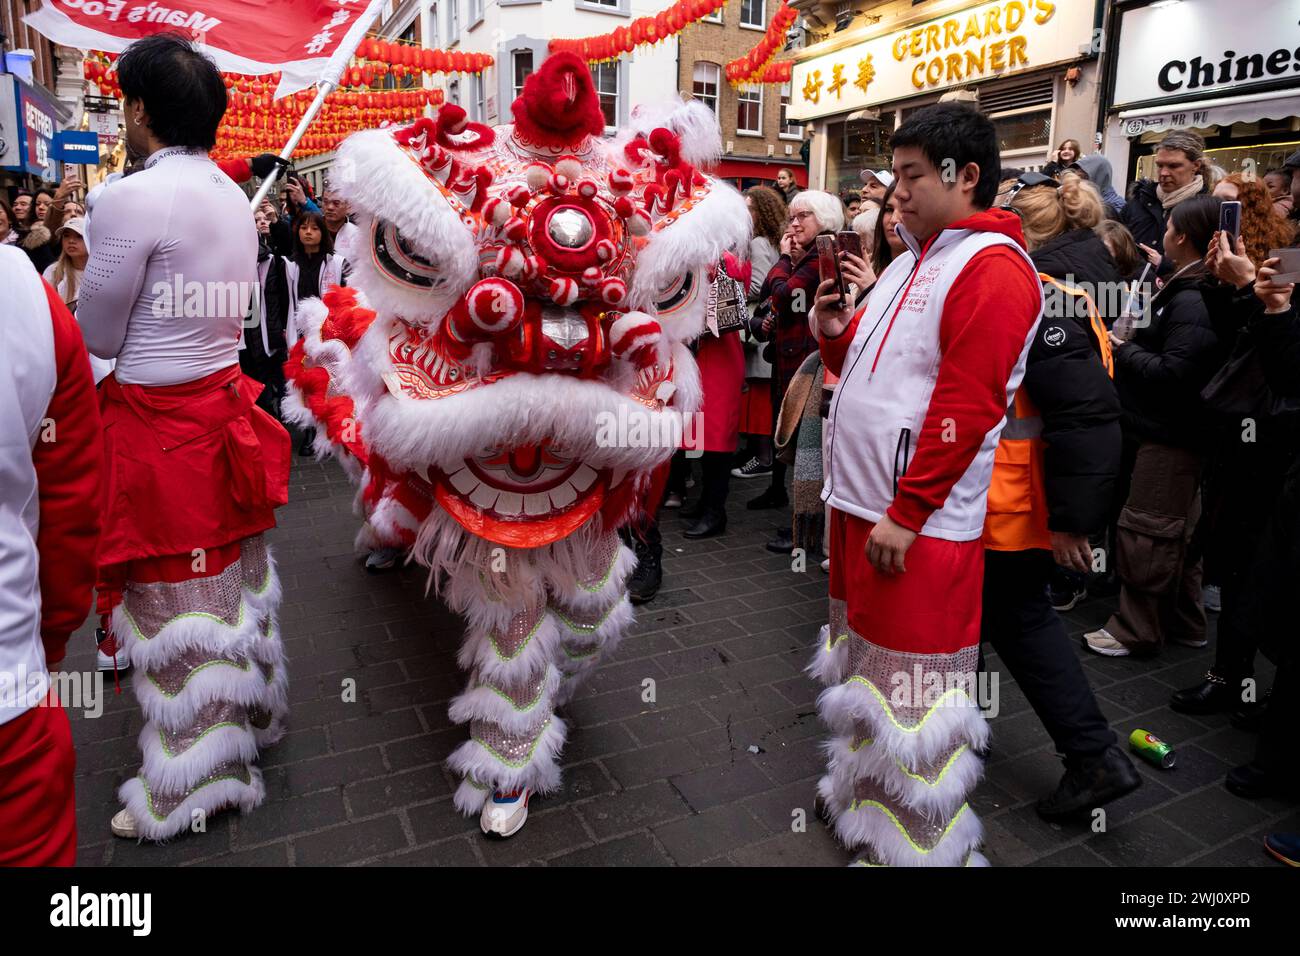 Lion Dance to celebrate the Chinese New Year of the Dragon which enters restaurants in Chinatown to bless them for the year ahead on 10th February 2024 in London, United Kingdom. Chinatown is an ethnic enclave bordering Soho and currently occupies the area in and around Gerrard Street. It contains a number of Chinese restaurants, bakeries, supermarkets, souvenir shops, and other Chinese-run businesses. Stock Photo